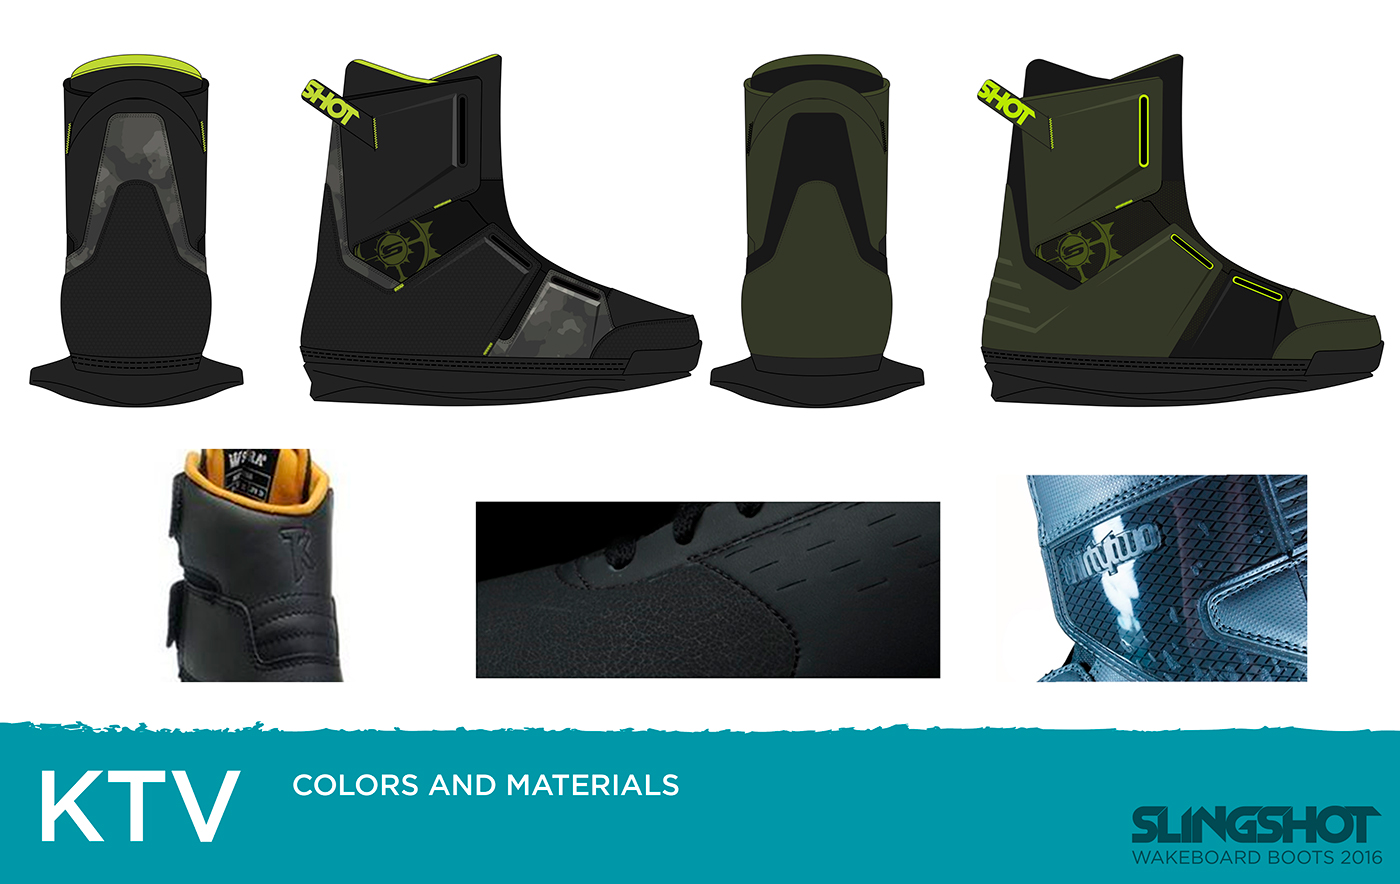  wakeboarding boots footwear footwear design action sports wake Water Sports industrial design  product design 